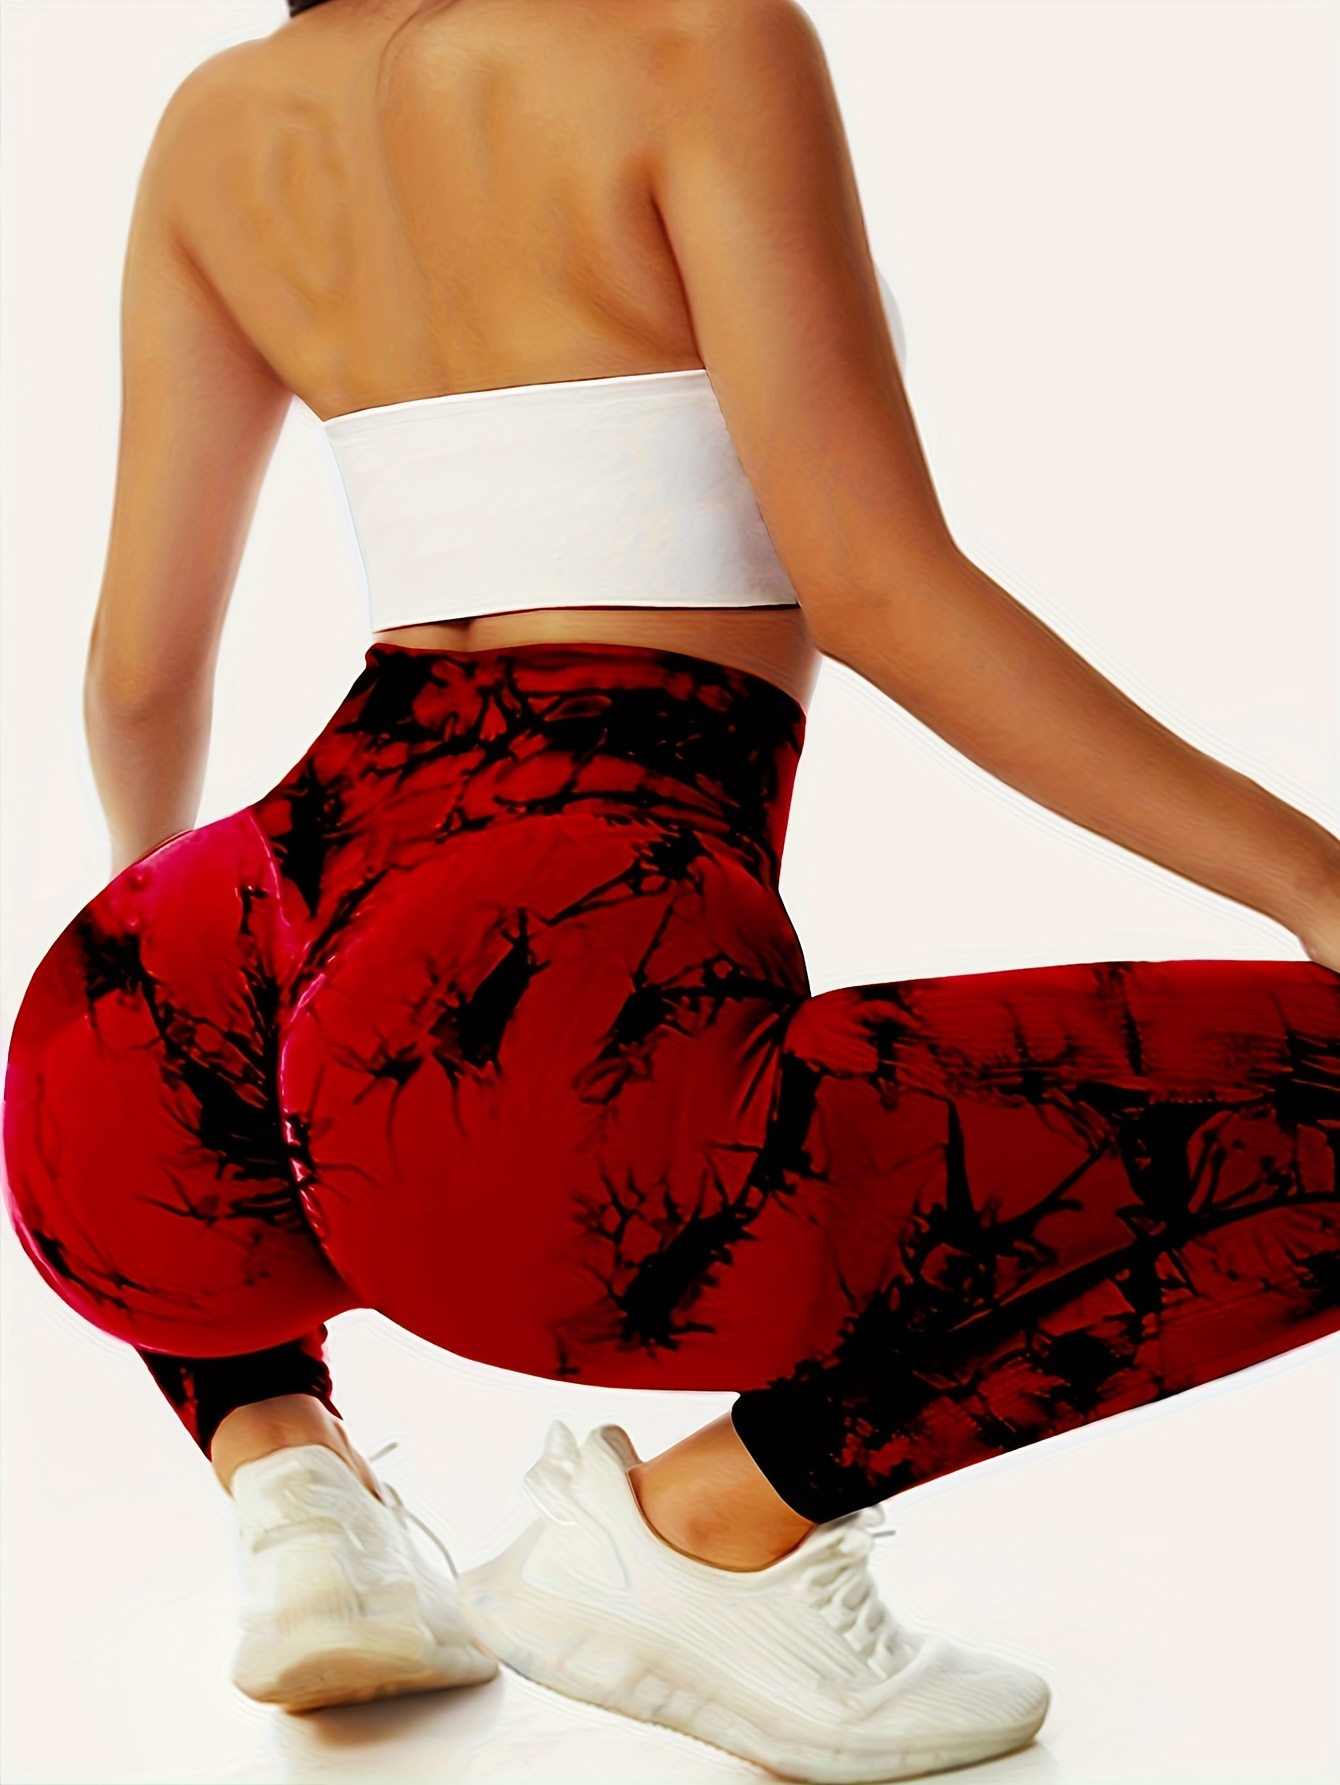 Yoga clothing for women • Compare & see prices now »